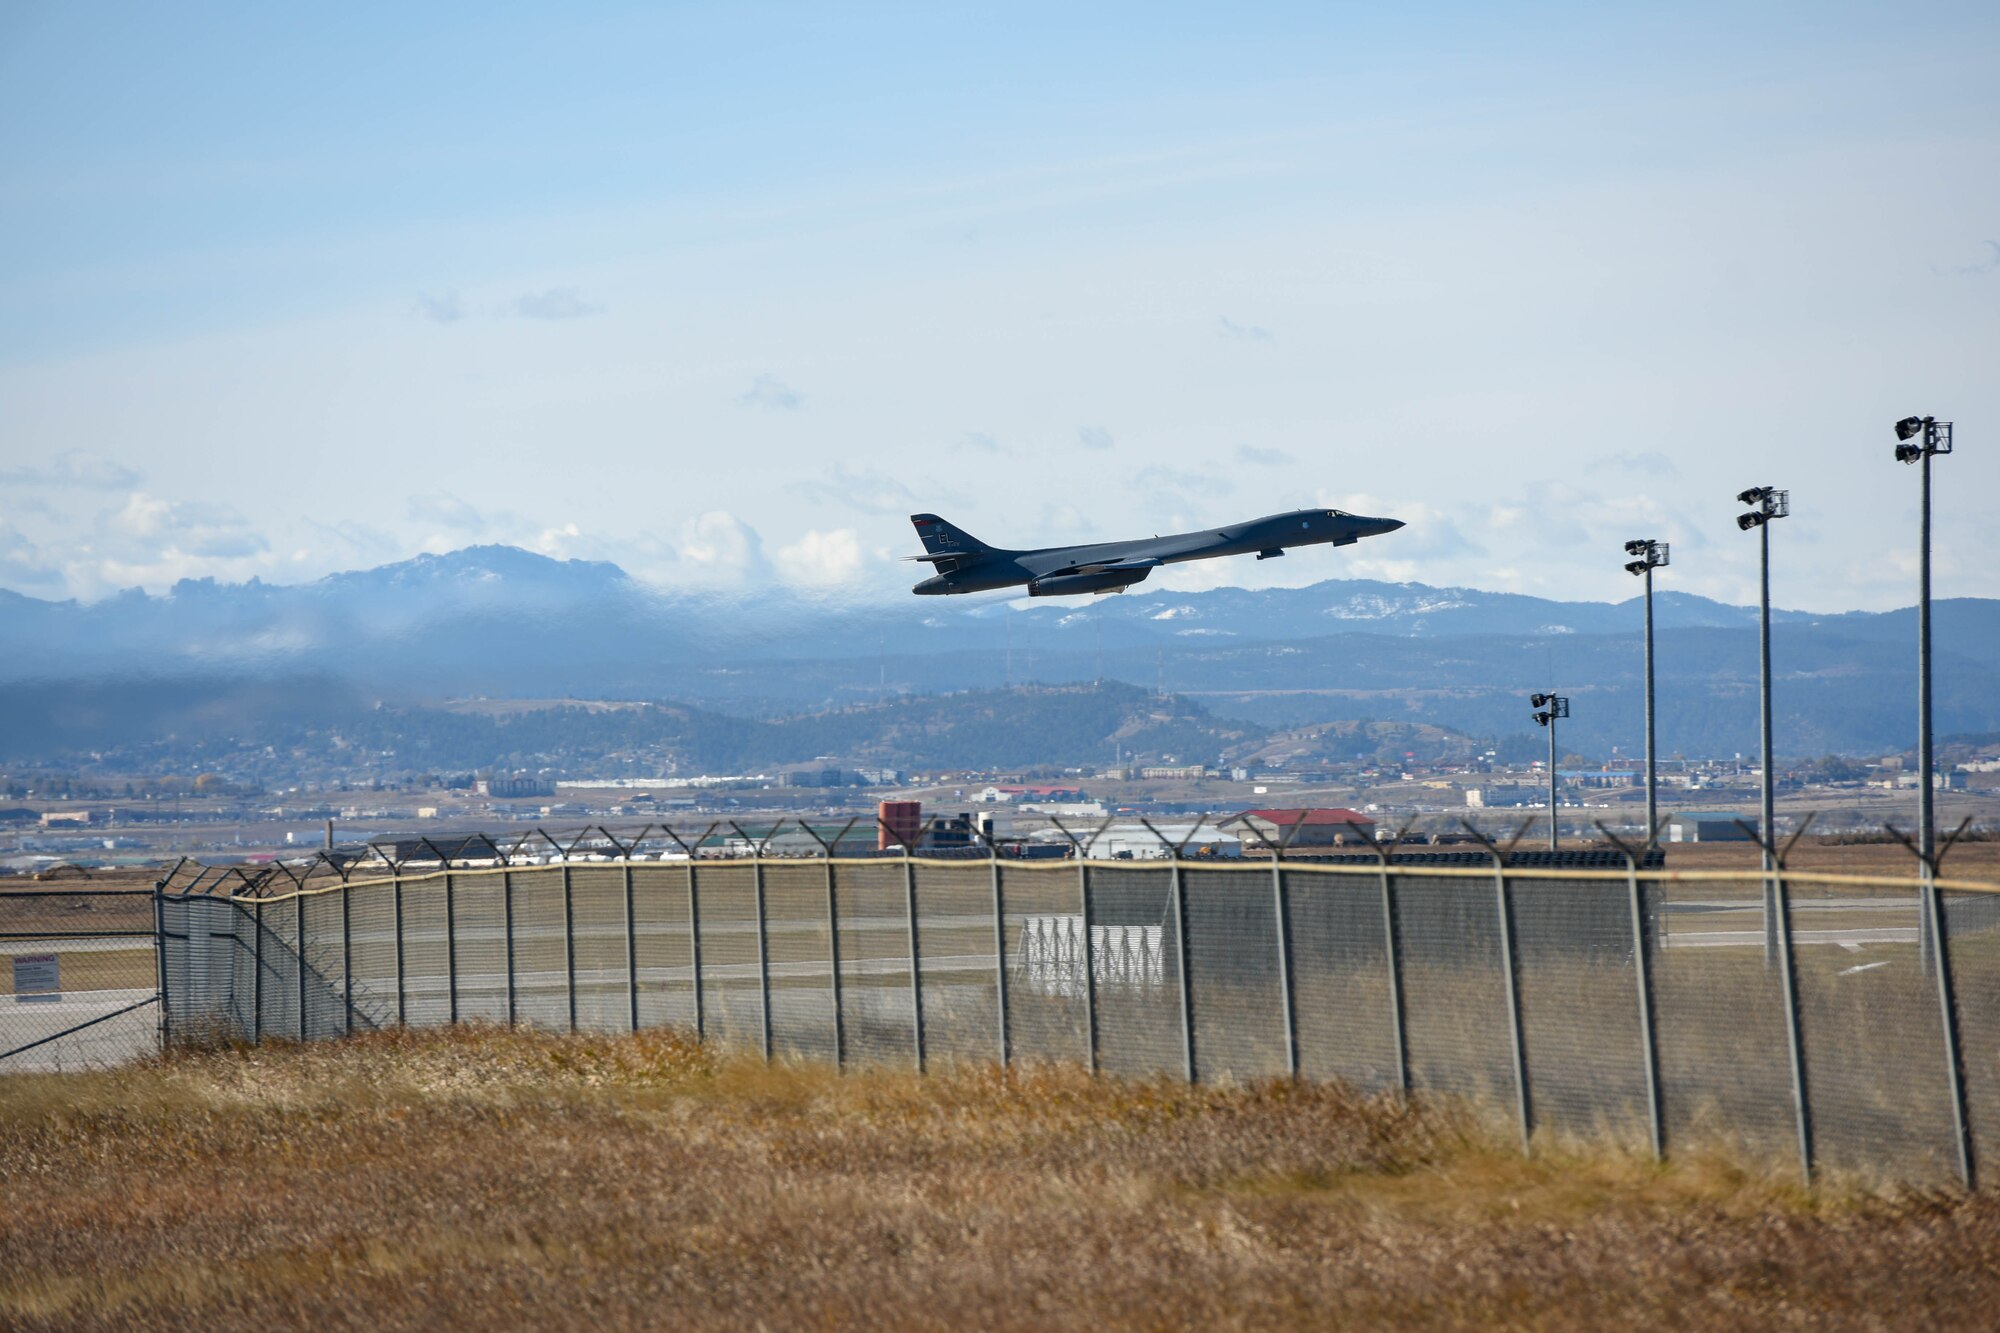 A B-1B Lancer assigned to the 28th Bomb Wing, takes off from Ellsworth Air Force Base, S.D., Oct. 24, 2019, to support a Bomber Task Force in the U.S. Central Command area of operations. The B-1 can rapidly deliver massive quantities of precision and non-precision weapons against any adversary. The Department of Defense maintains command and control of its bomber force for any mission, anywhere in the world, at any time. (U.S. Air Force photo by Master Sgt. Kenya N. Shiloh)